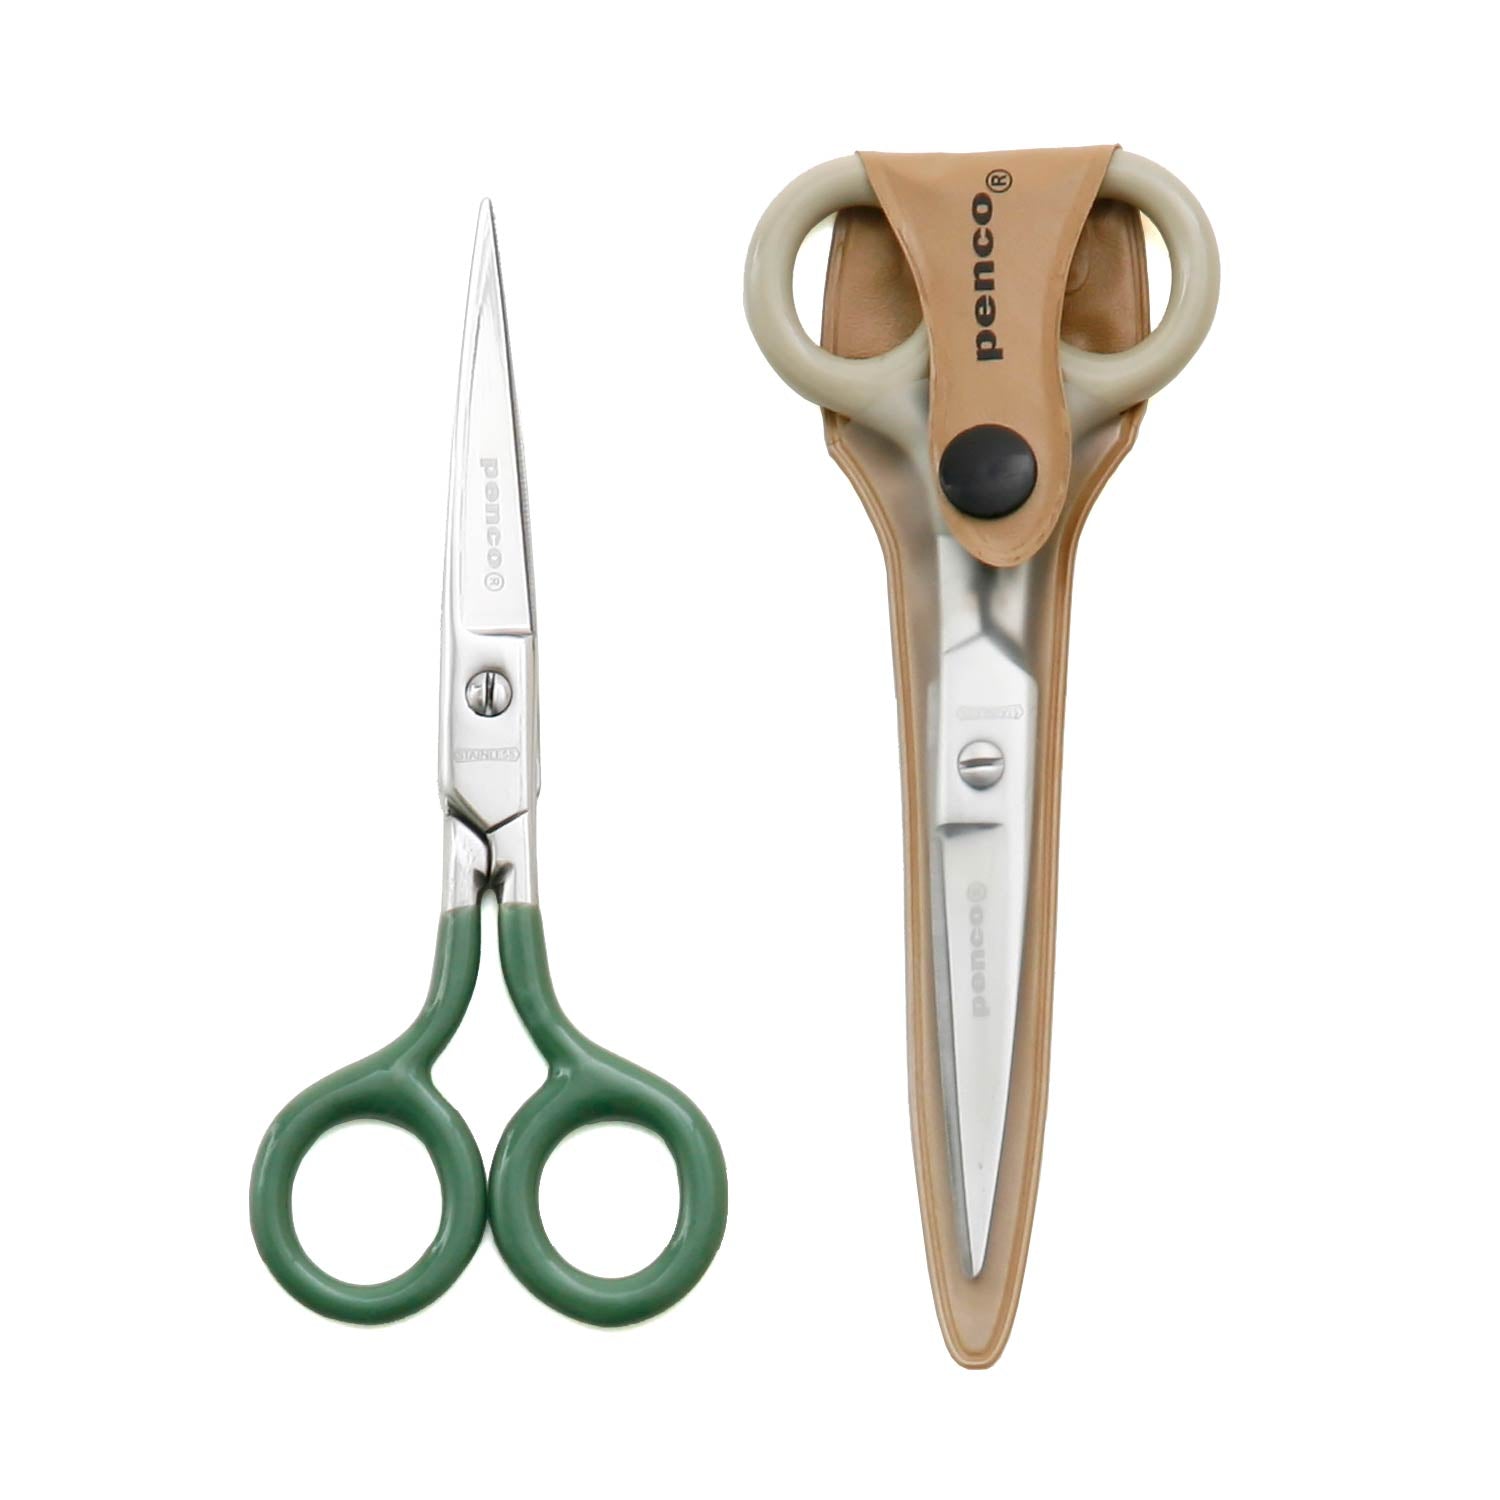 Photo of two scissors, one with protective plastic cover and one without.